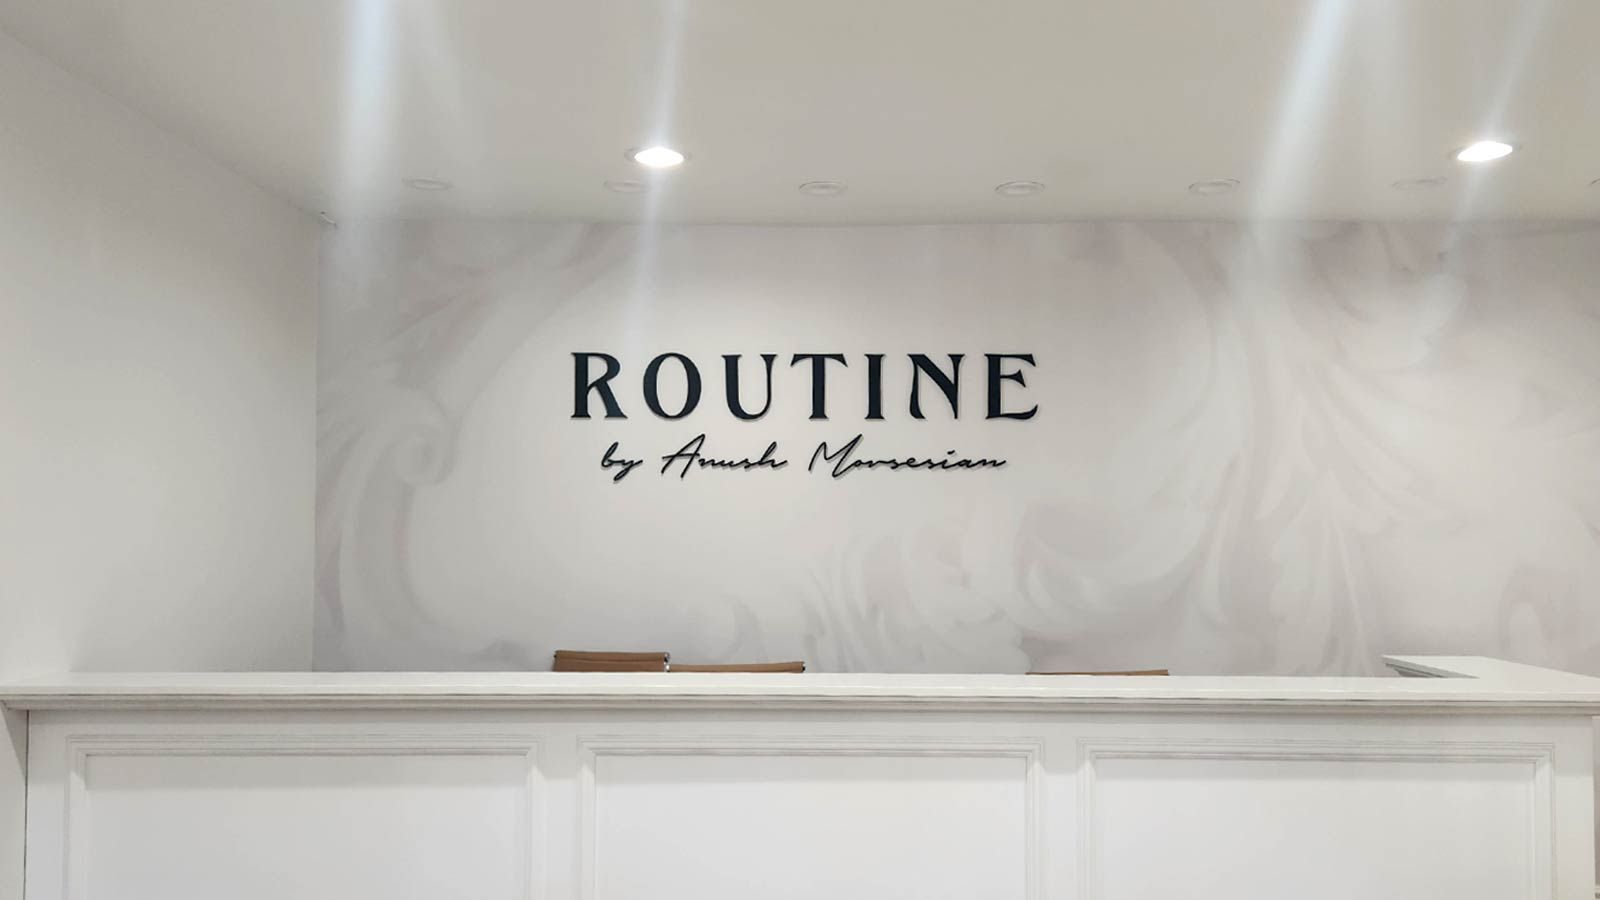 Routine by Anush Movsesian acrylic sign attached to a wall